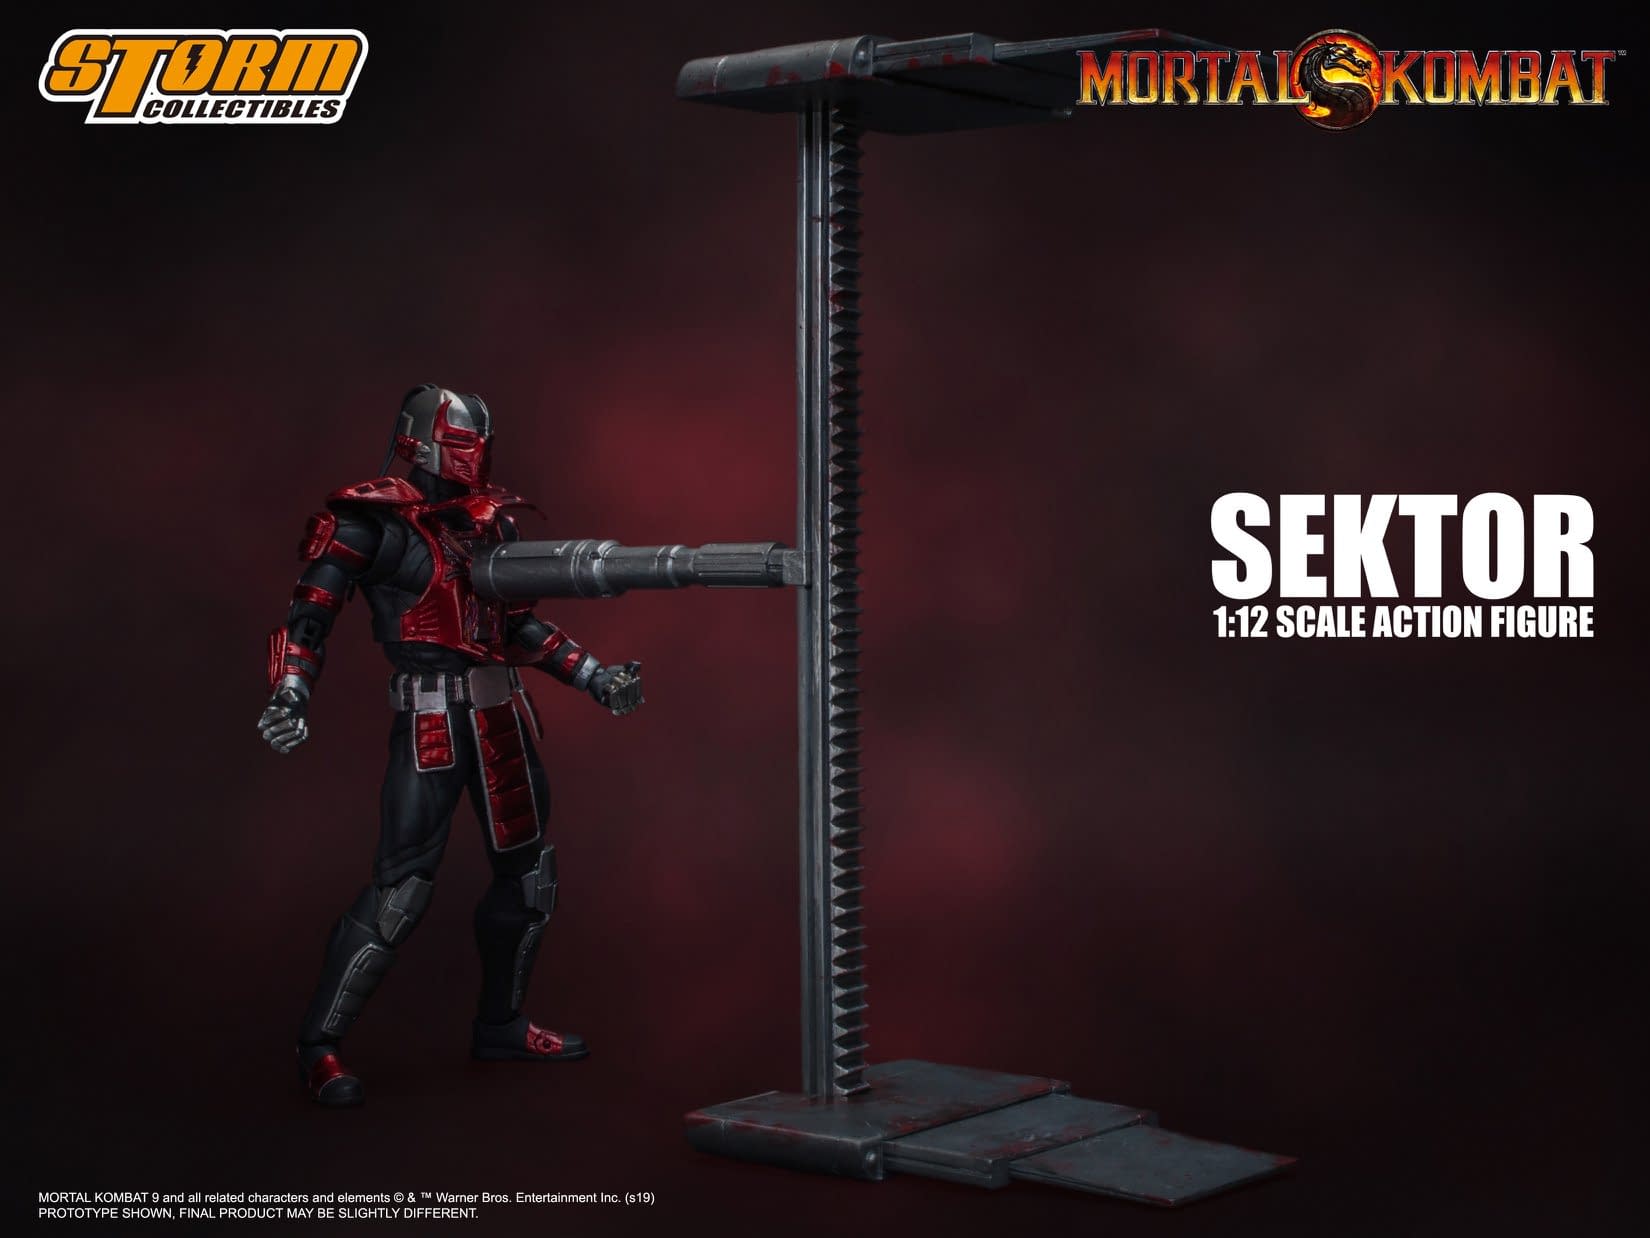 Sektor Enters the "Mortal Kombat" from Storm Collectibles